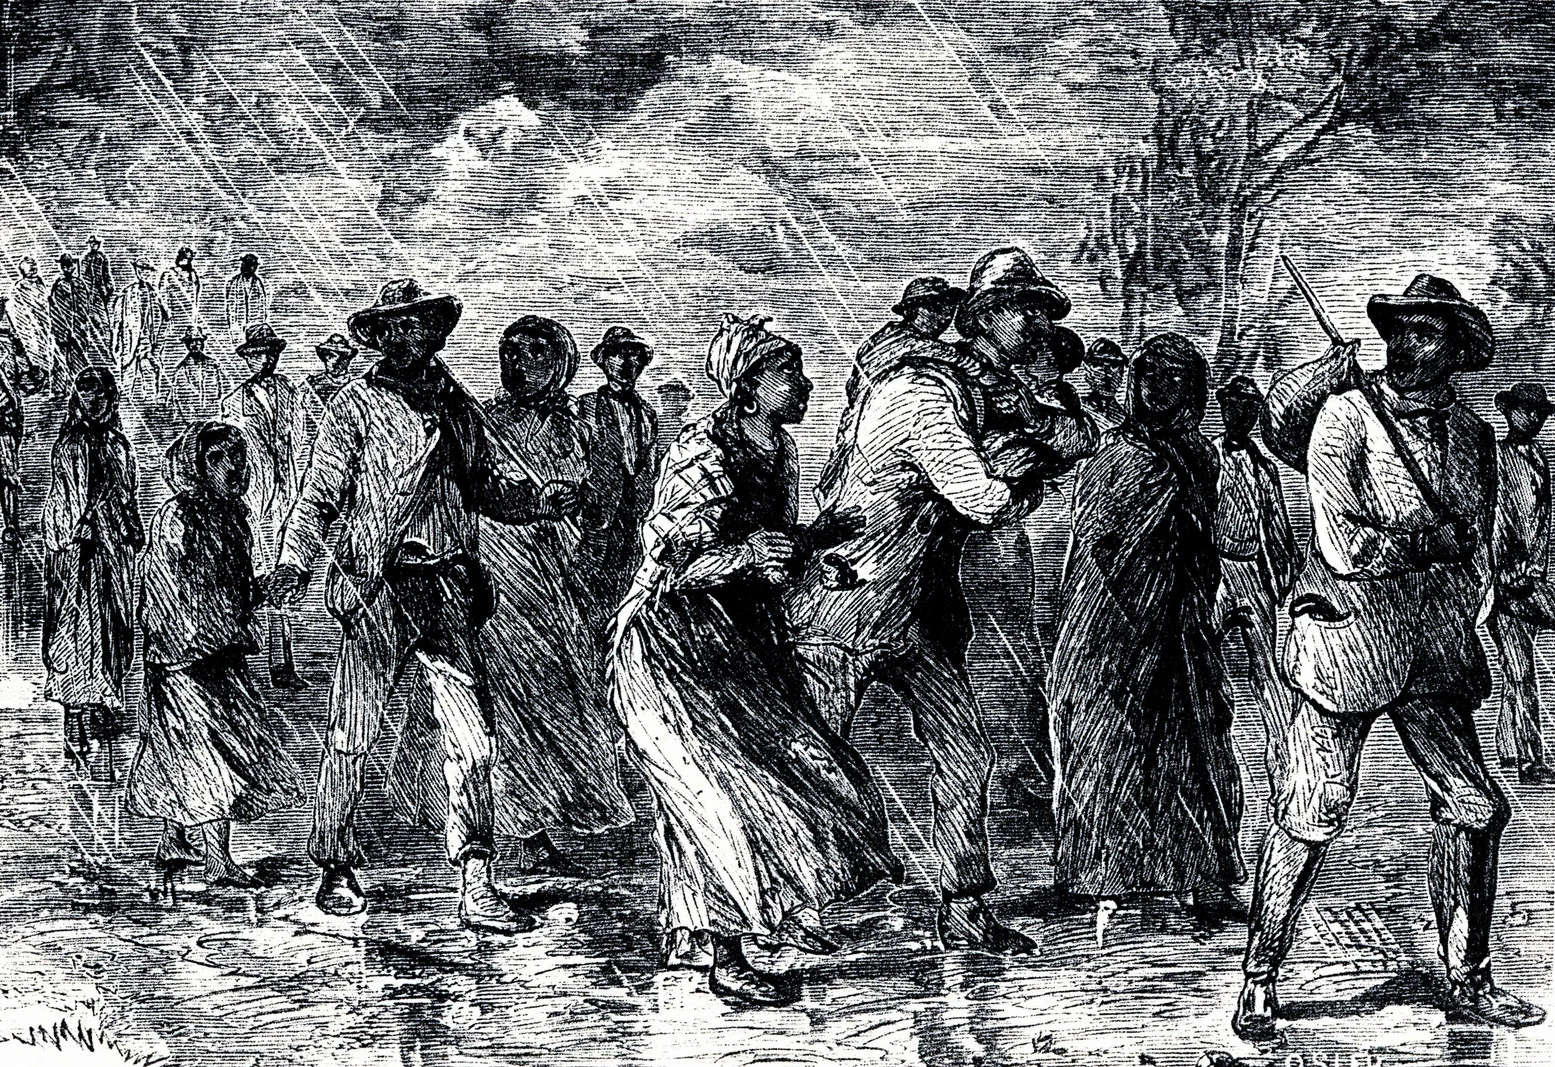 Should Black NJ residents get reparation payments for slavery?